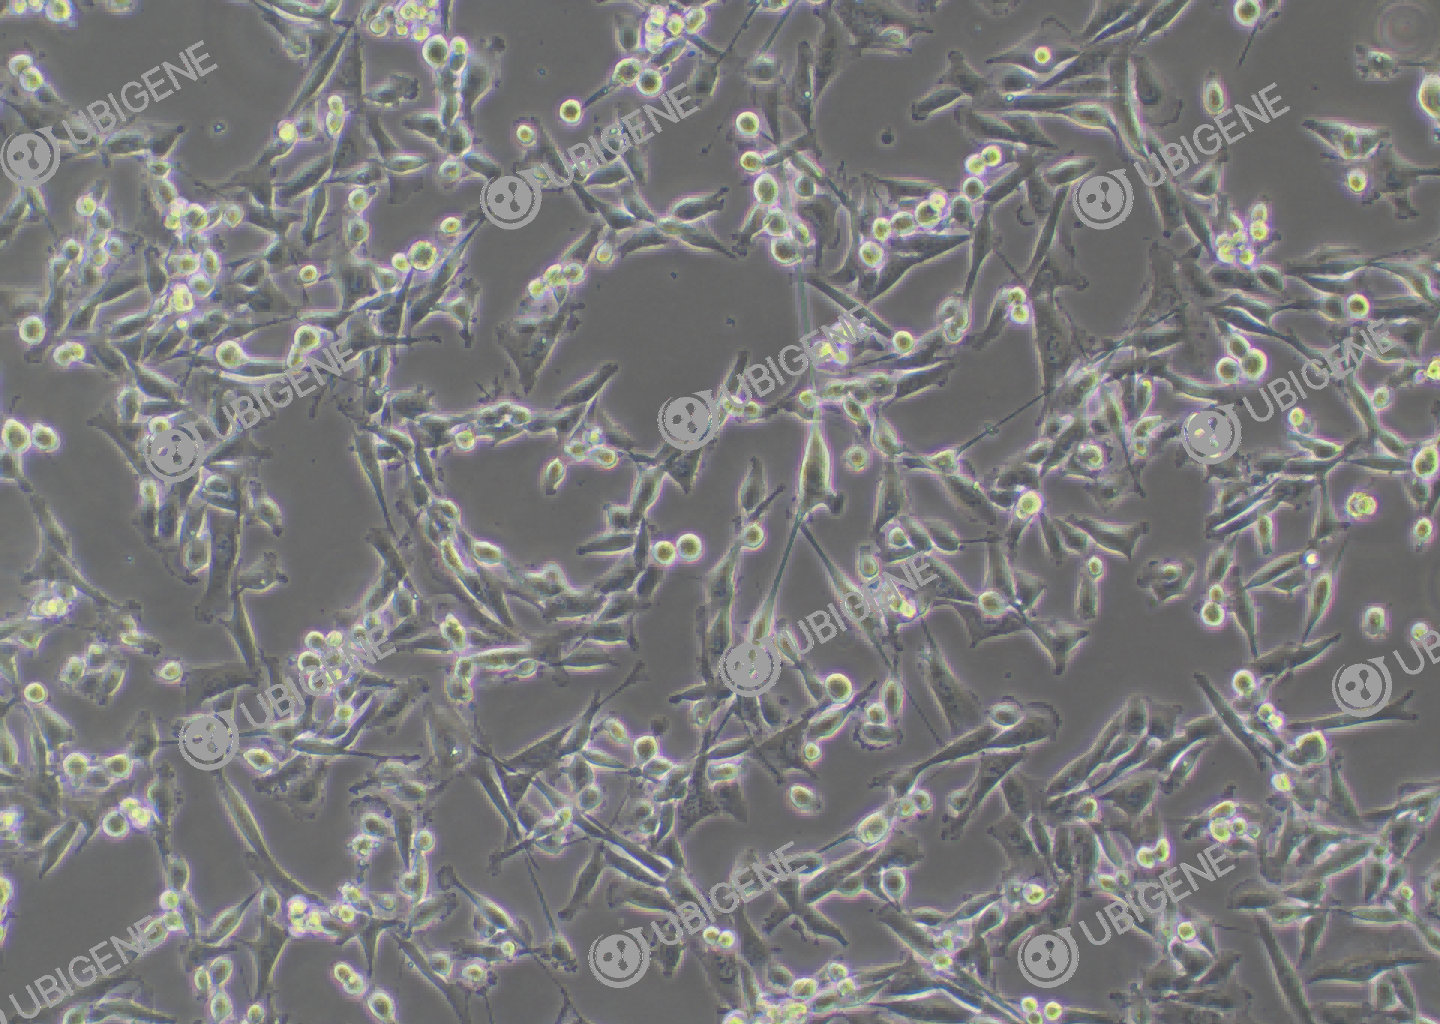 NCI-H1975 cell line Cultured cell morphology